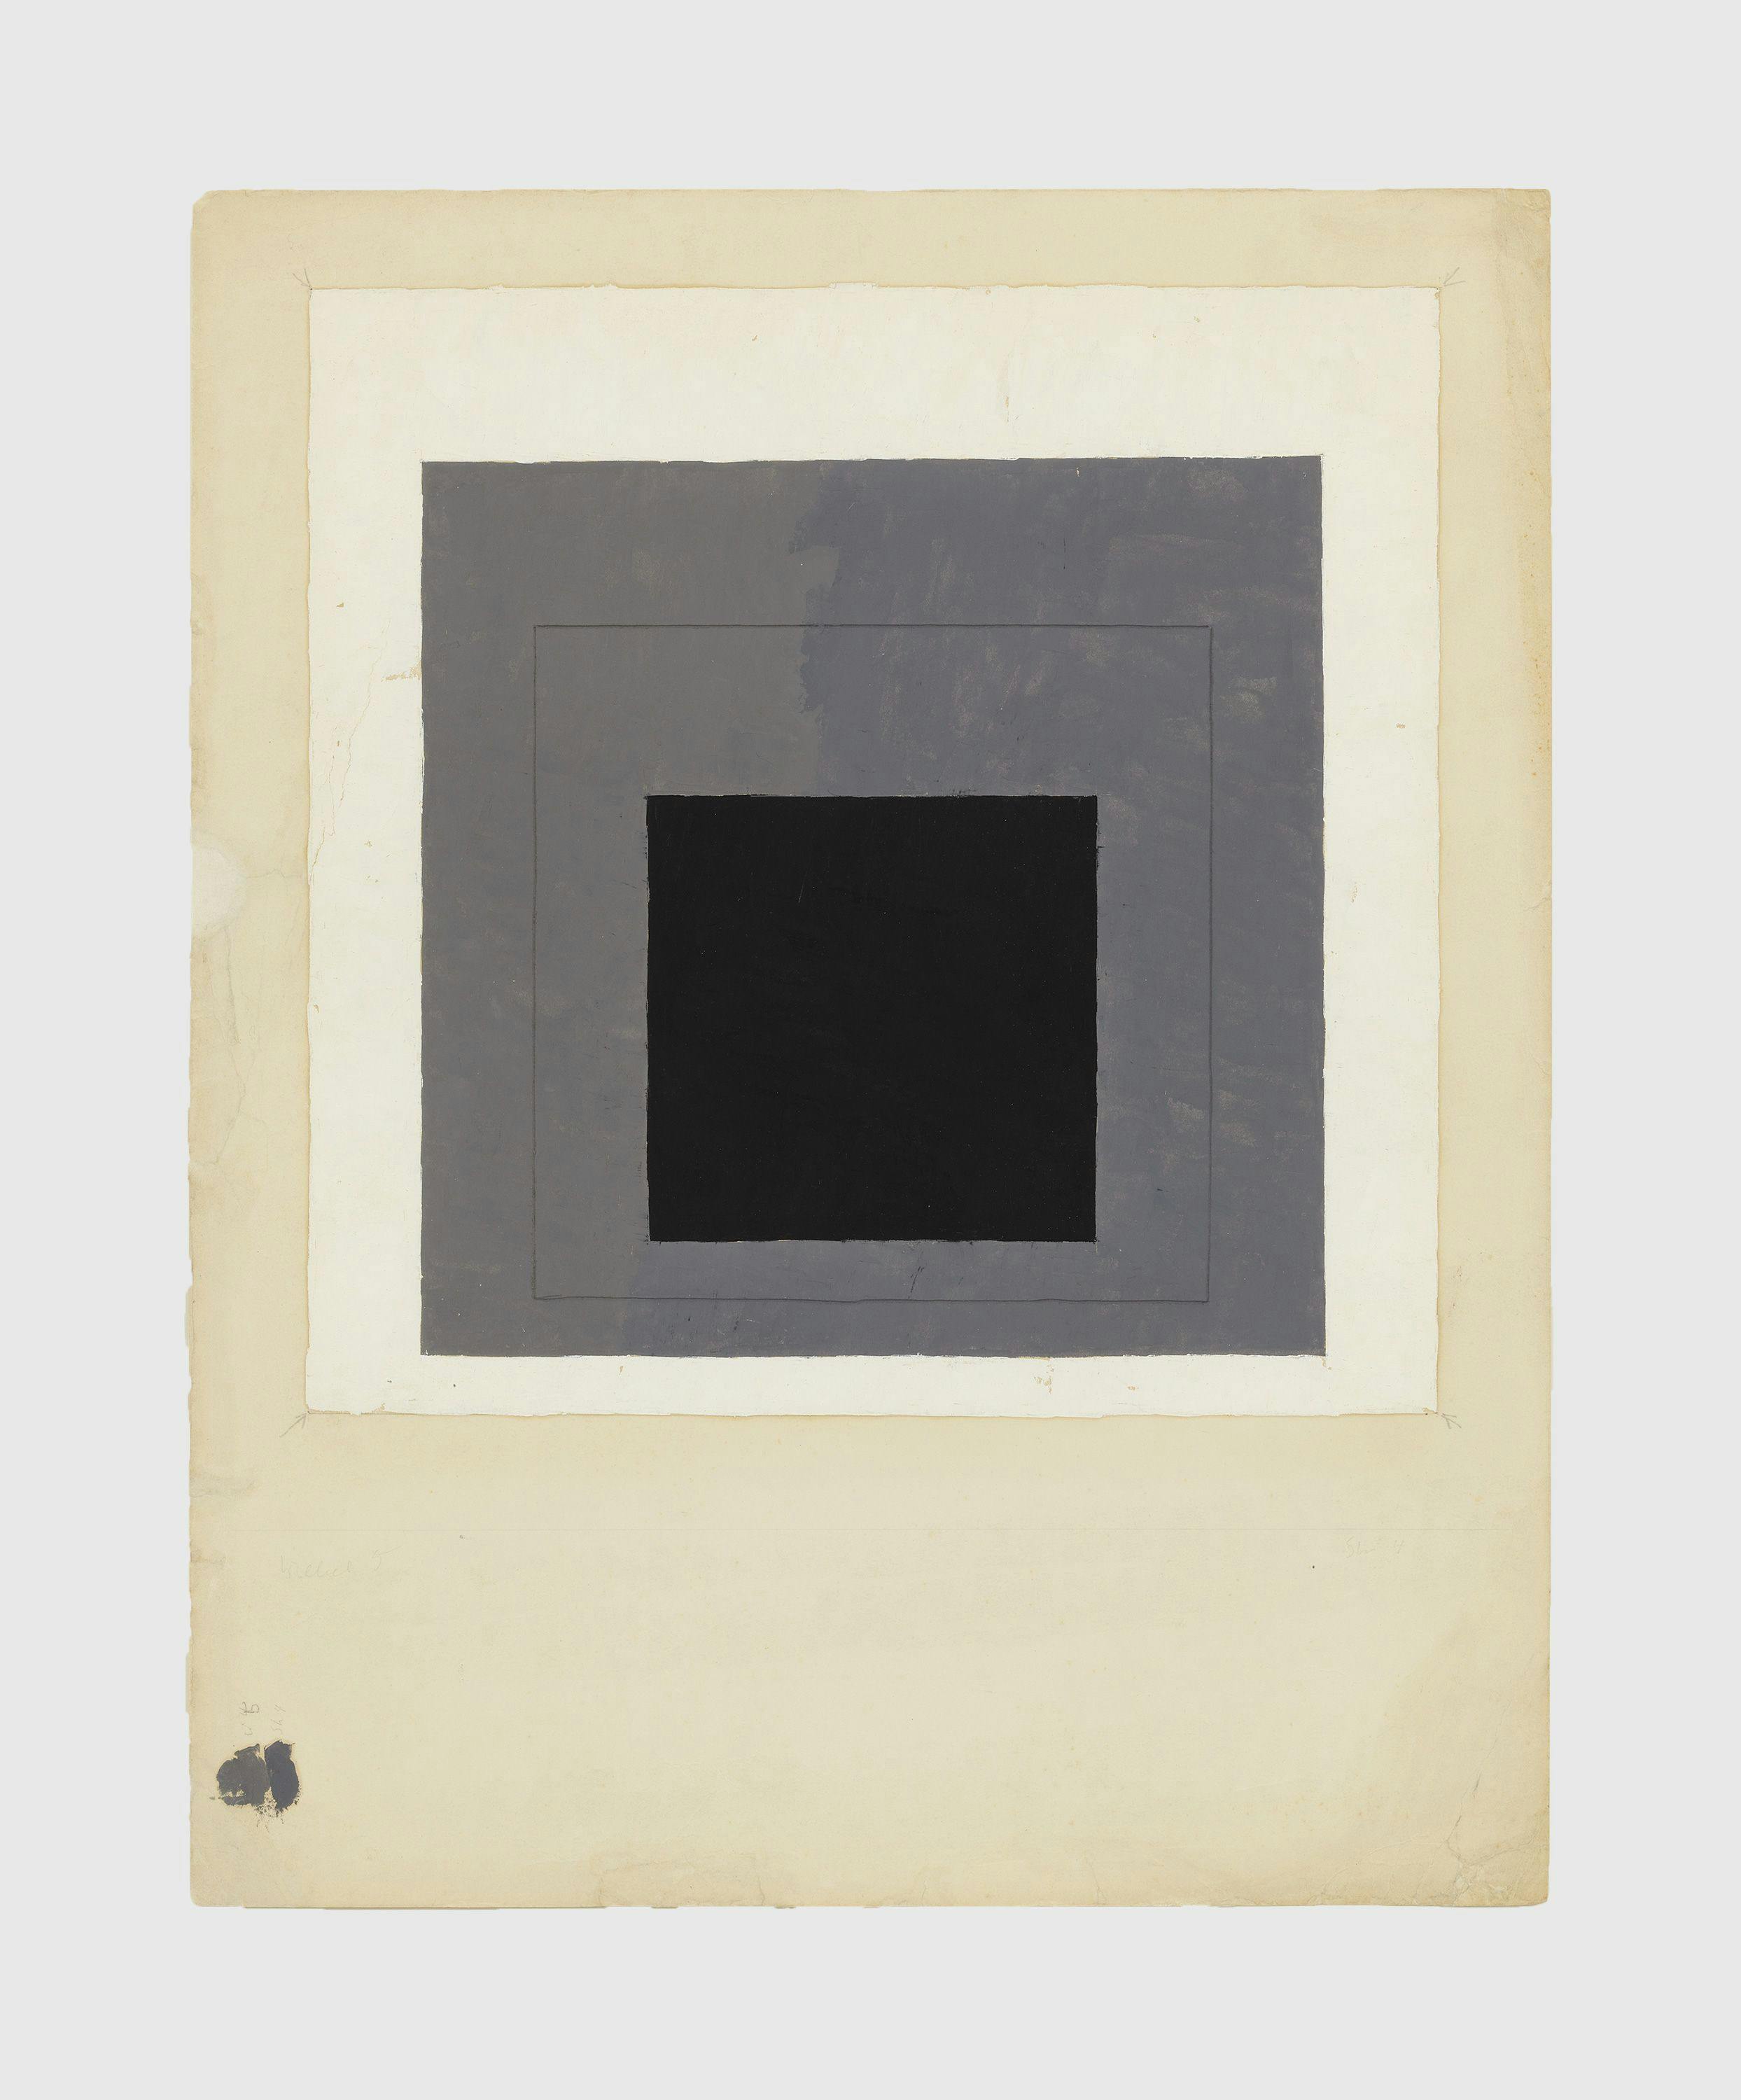 A painting by Josef Albers, titled Dominating White, circa 1927.